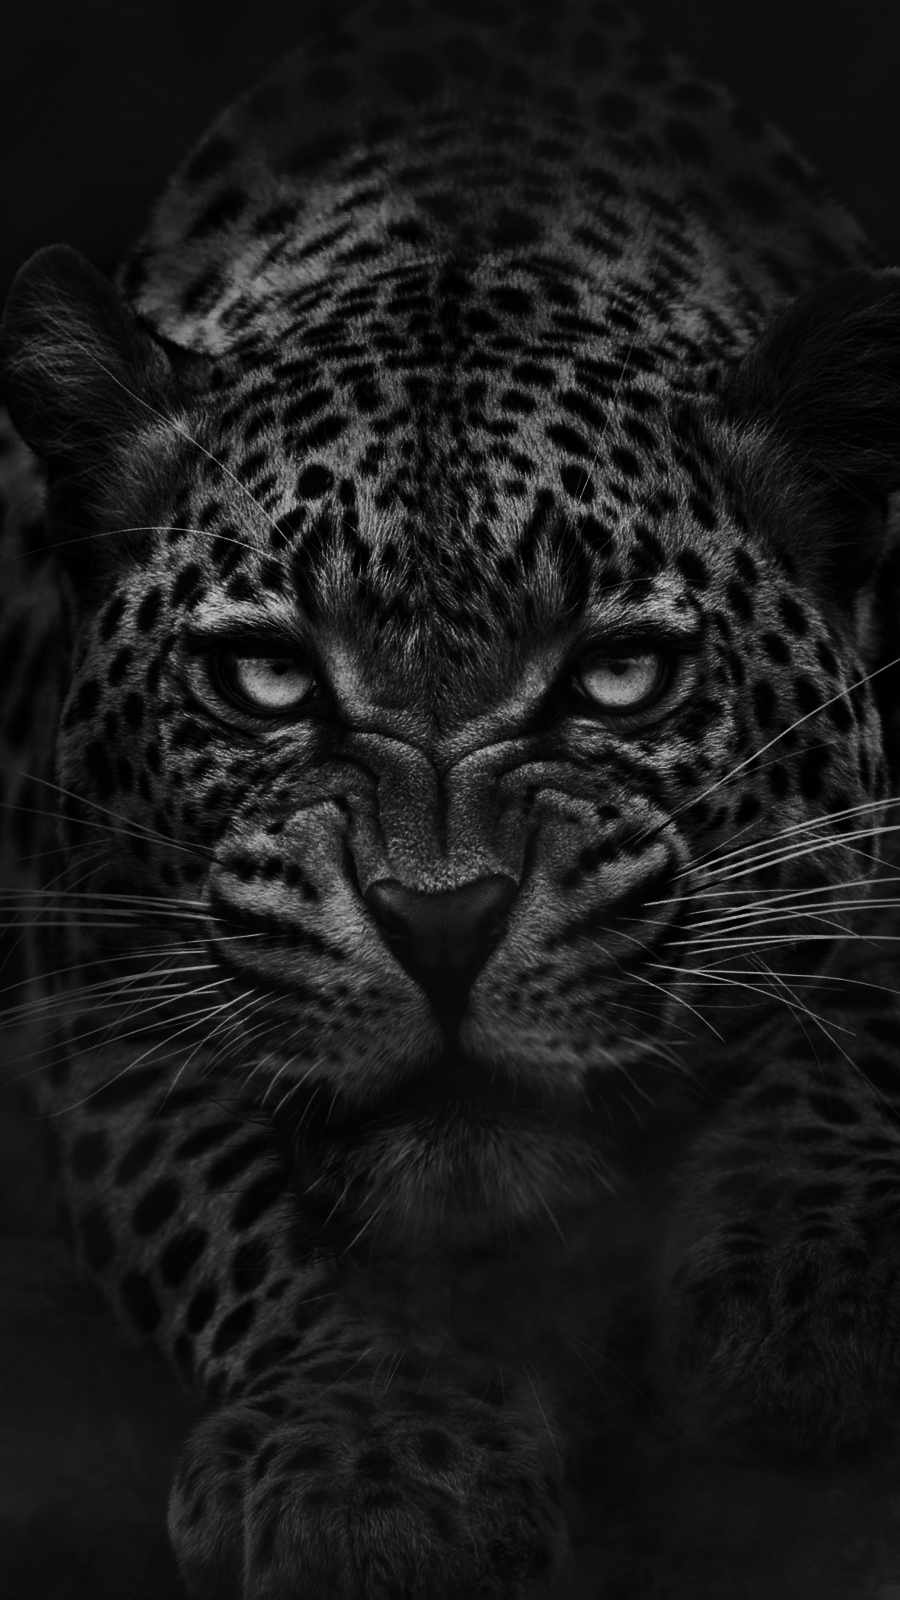 Angry Panther IPhone Wallpaper - IPhone Wallpapers : iPhone Wallpapers